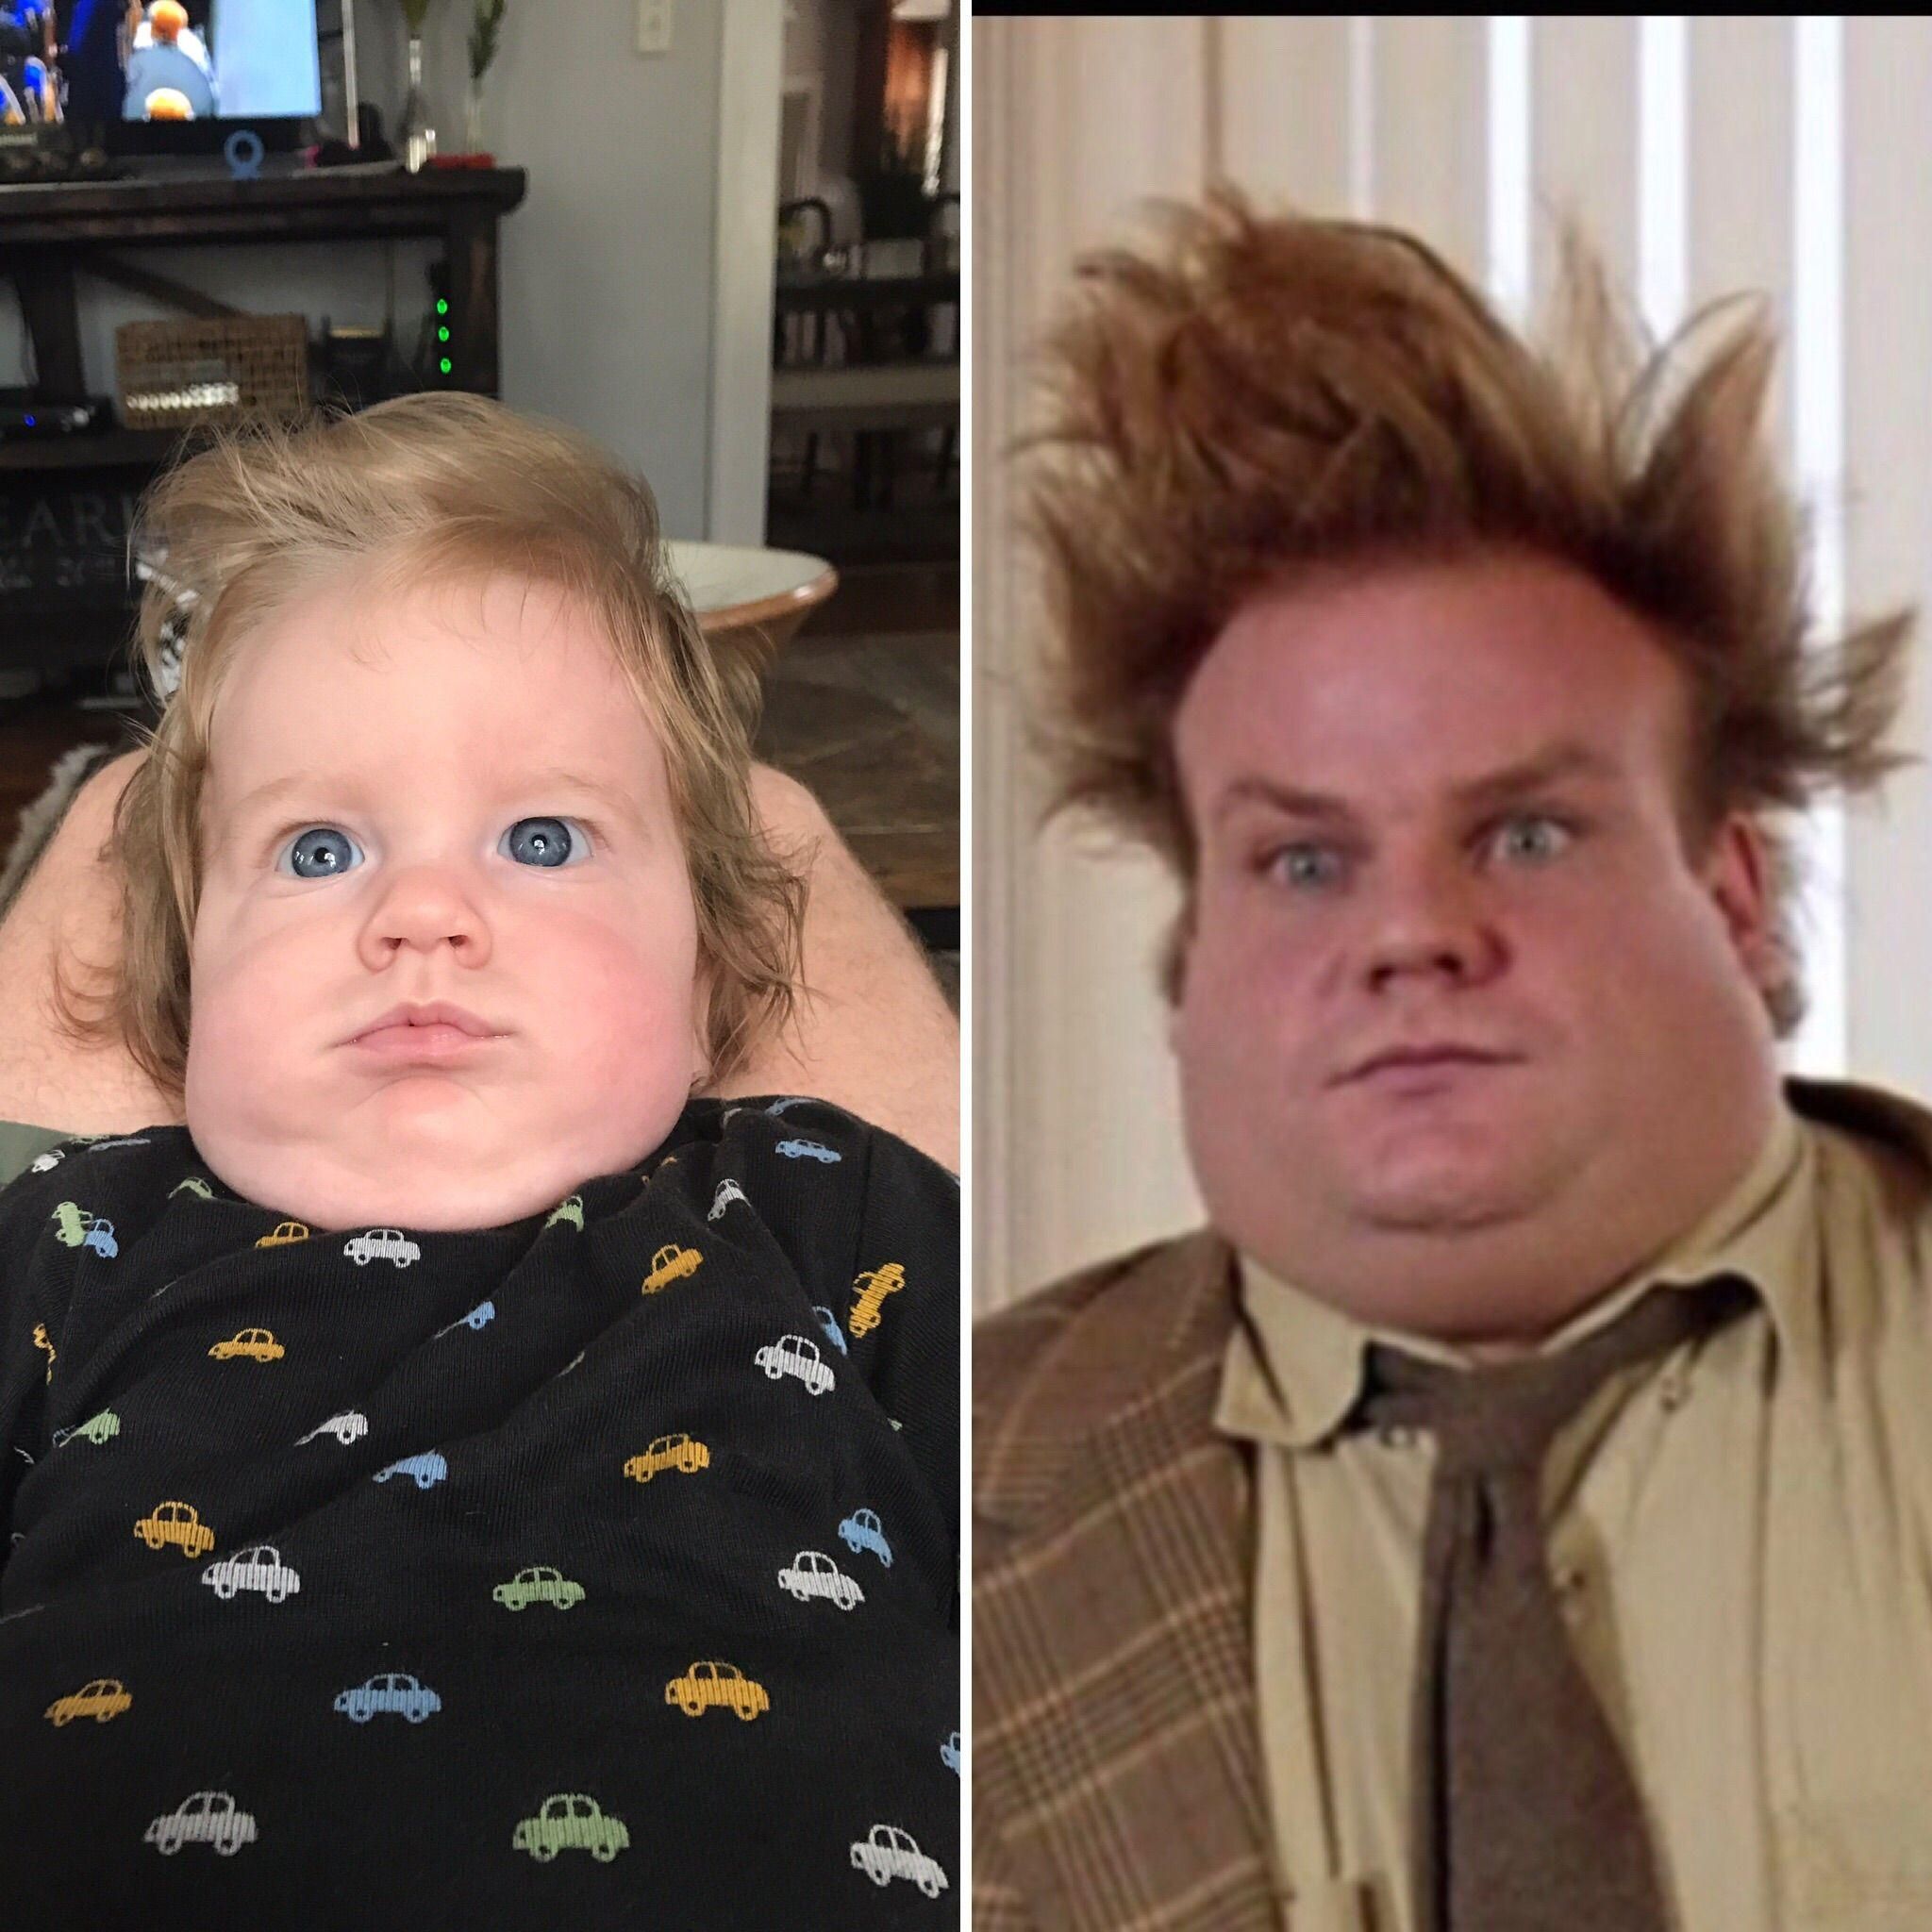 My nephew also looks like he may live in a van down by the river